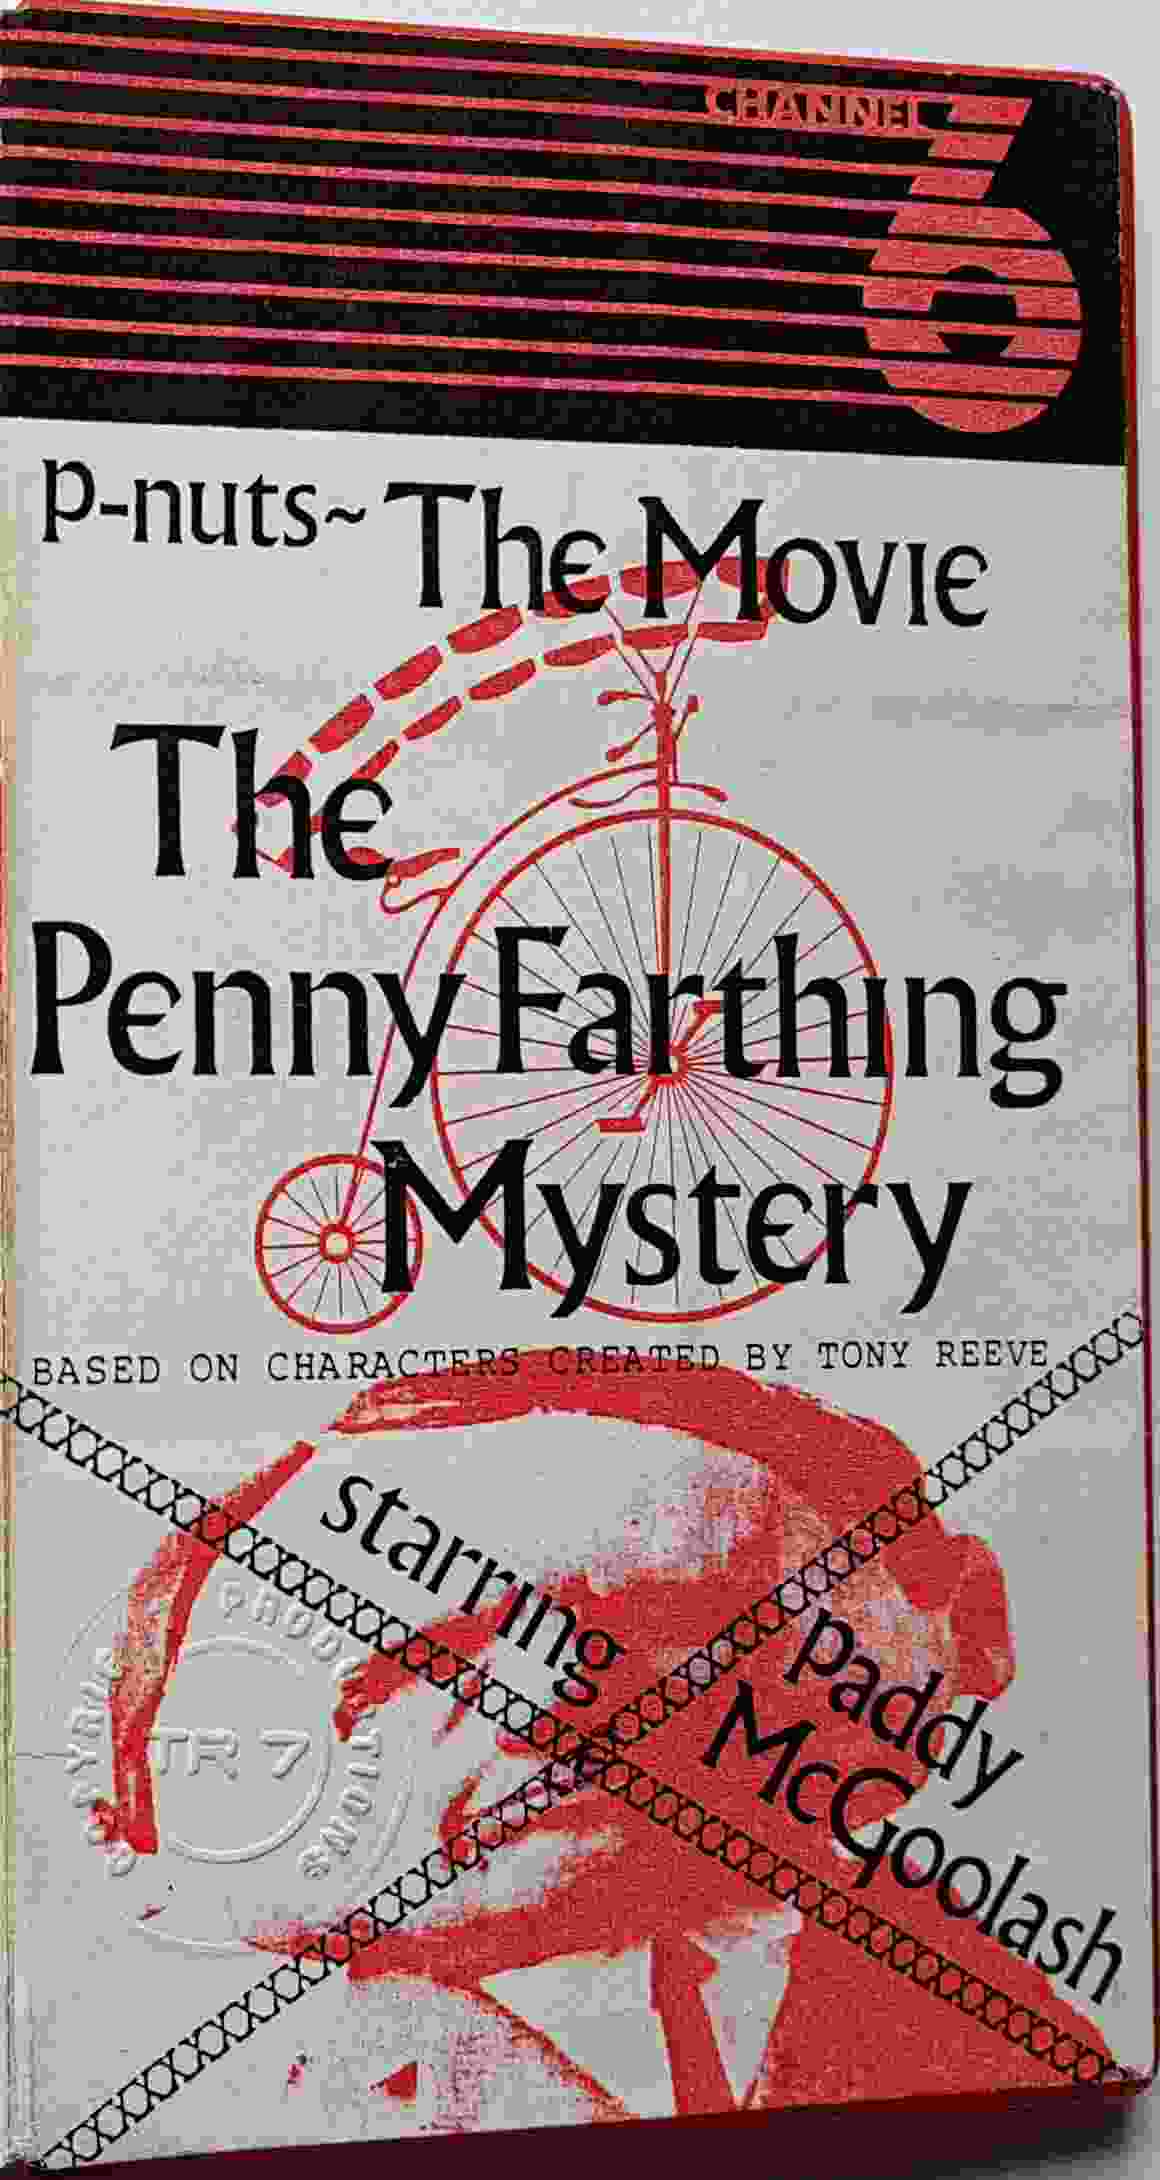 Picture of videos-PM-TPFM Paddy McGoolash - The penny farthing mystery by artist Unknown 